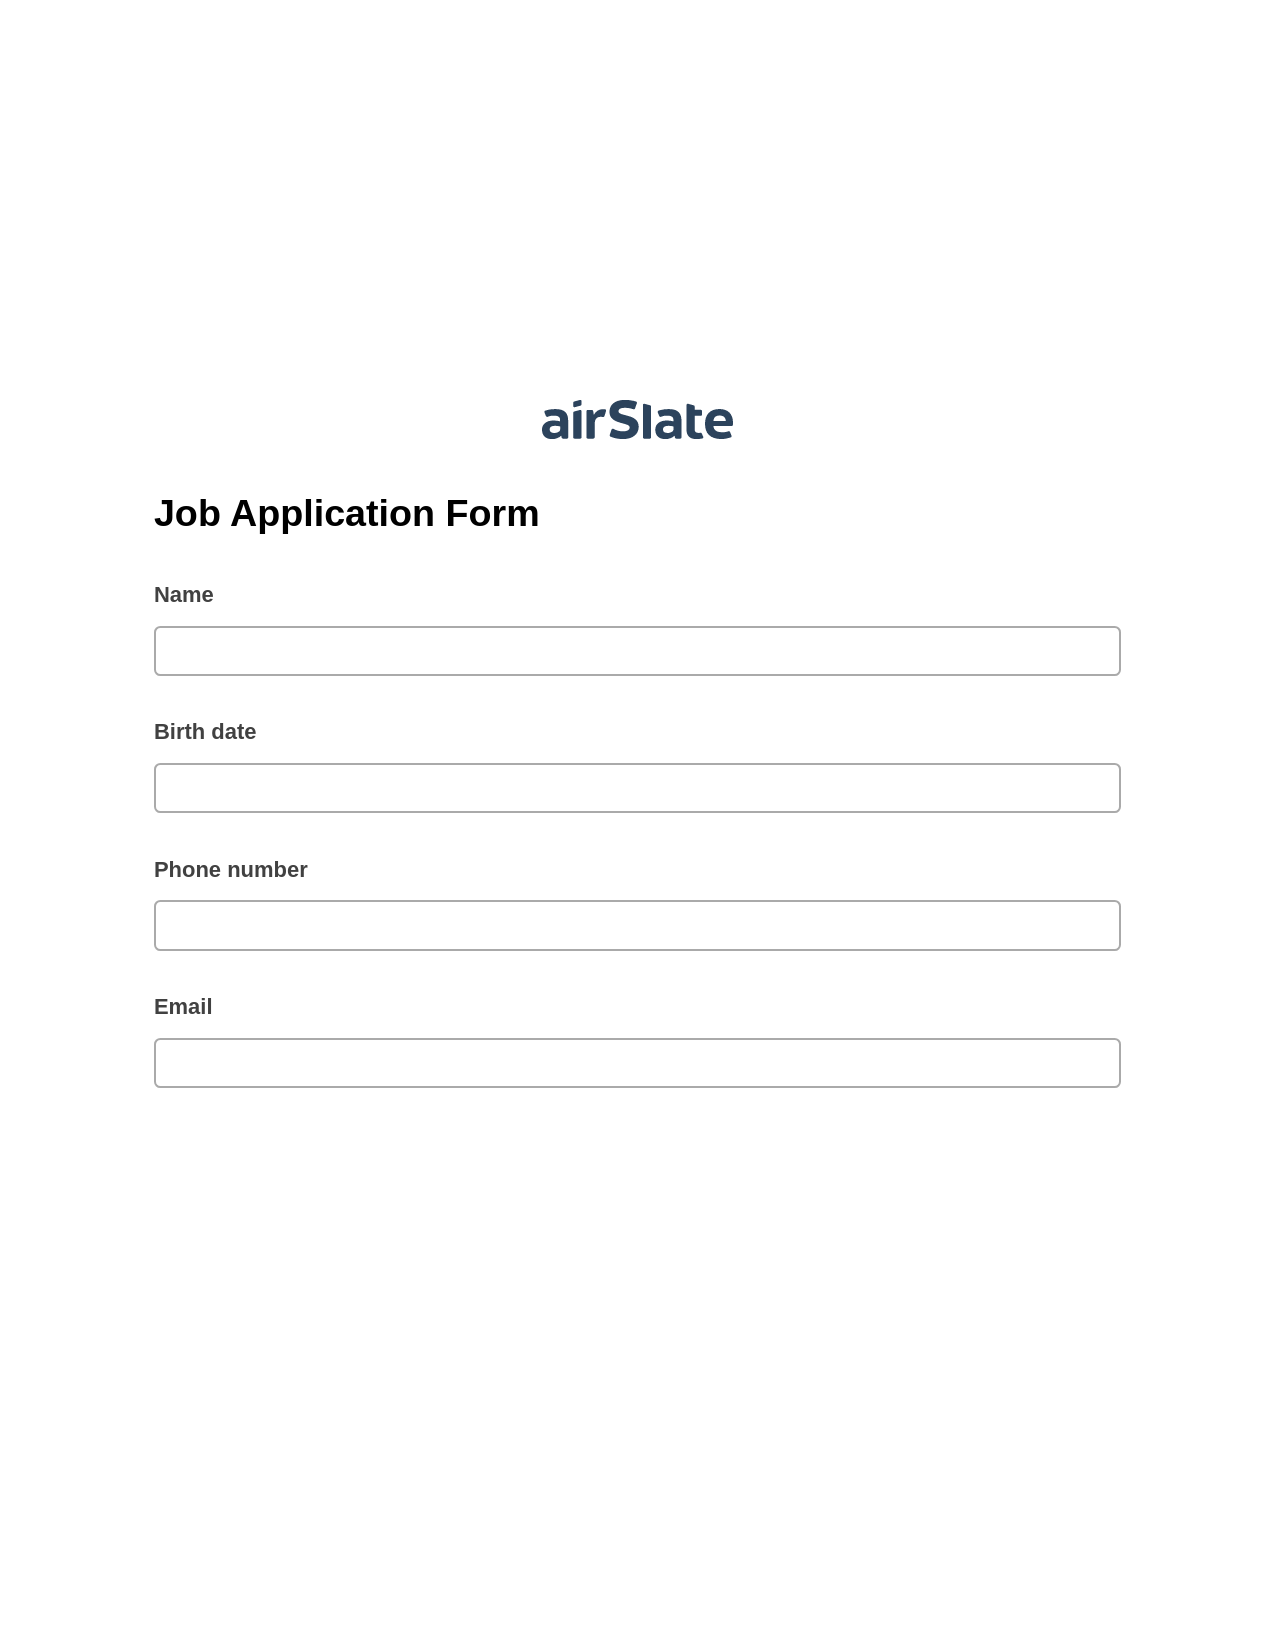 Job Application Form Pre-fill from Google Sheets Bot, Roles Reminder Bot, Archive to SharePoint Folder Bot